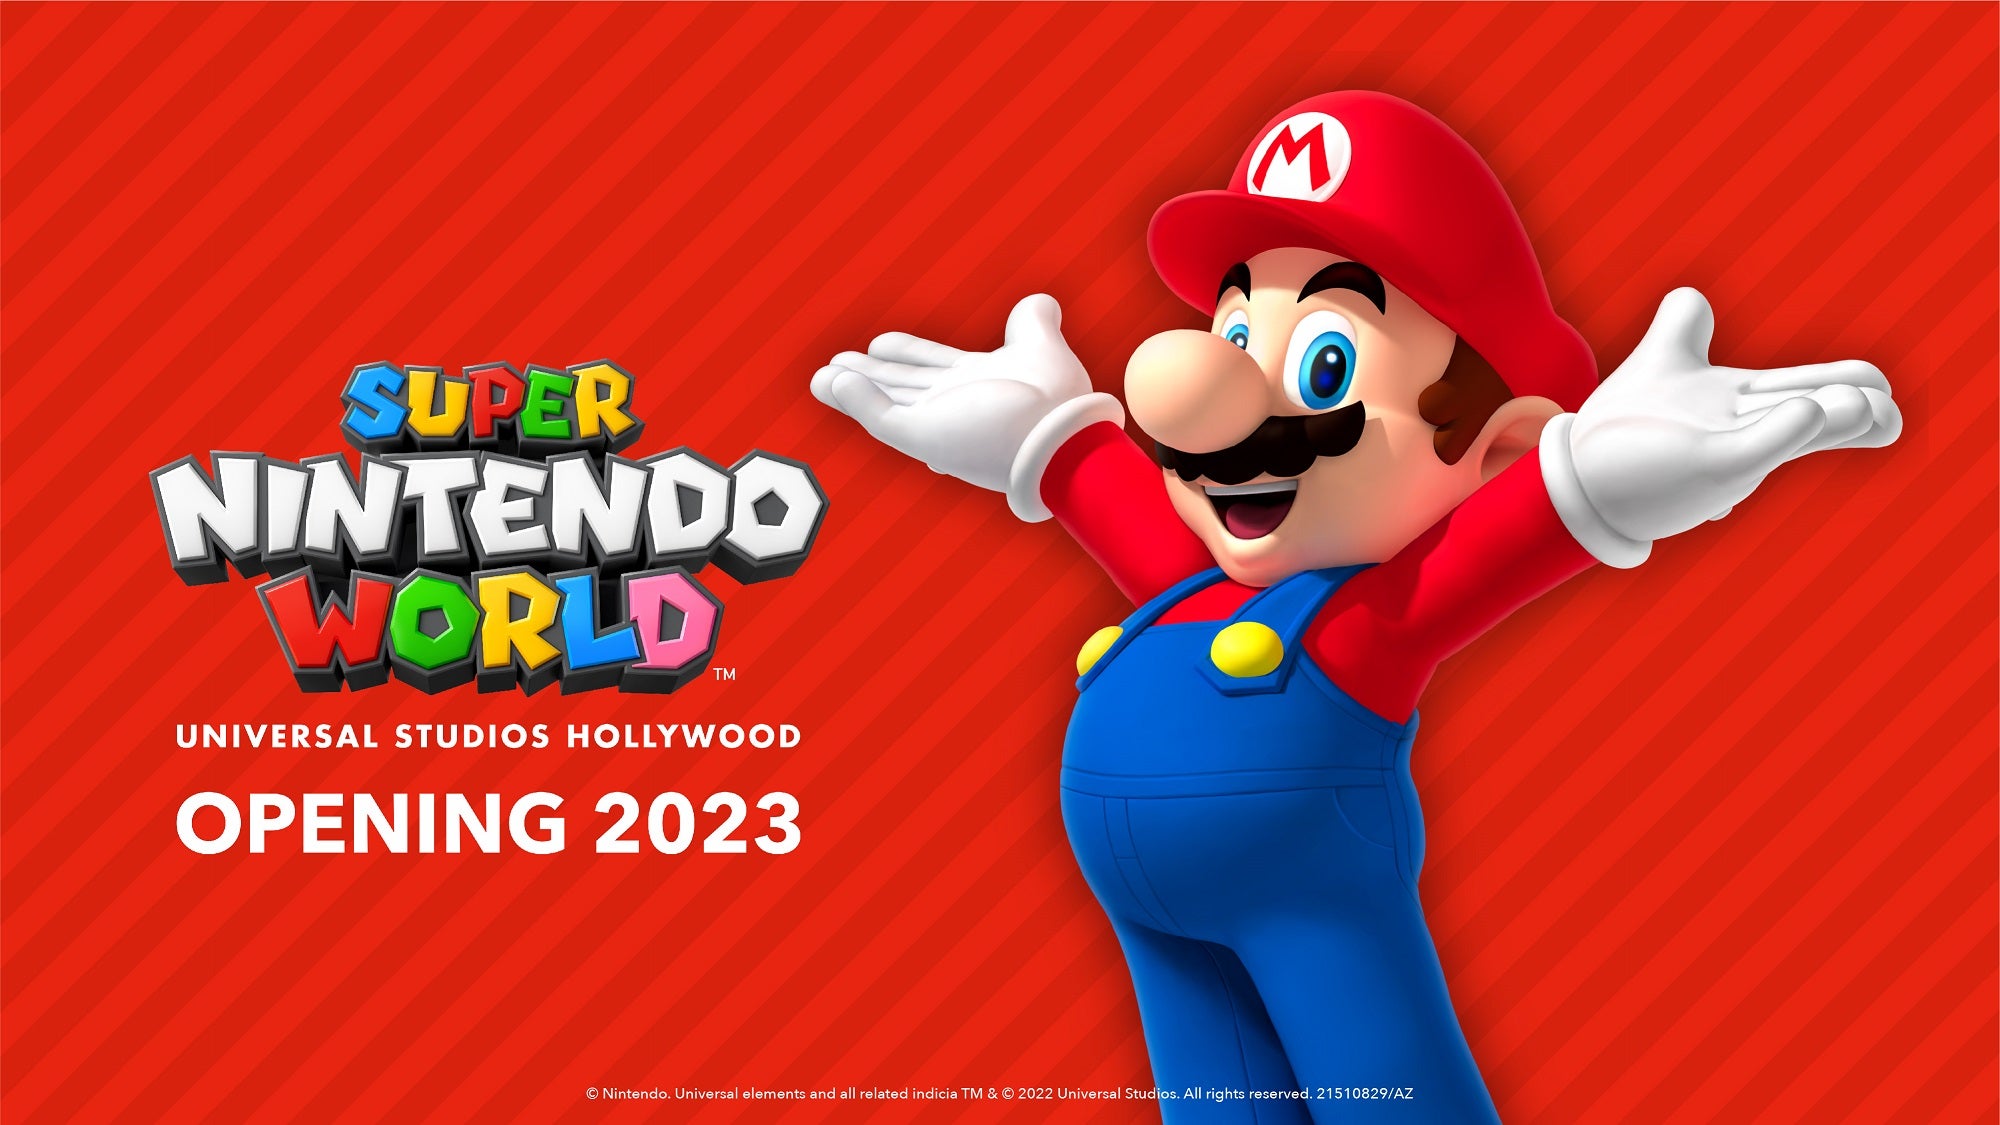 Image for Super Nintendo World to open at Universal Studios Hollywood in 2023